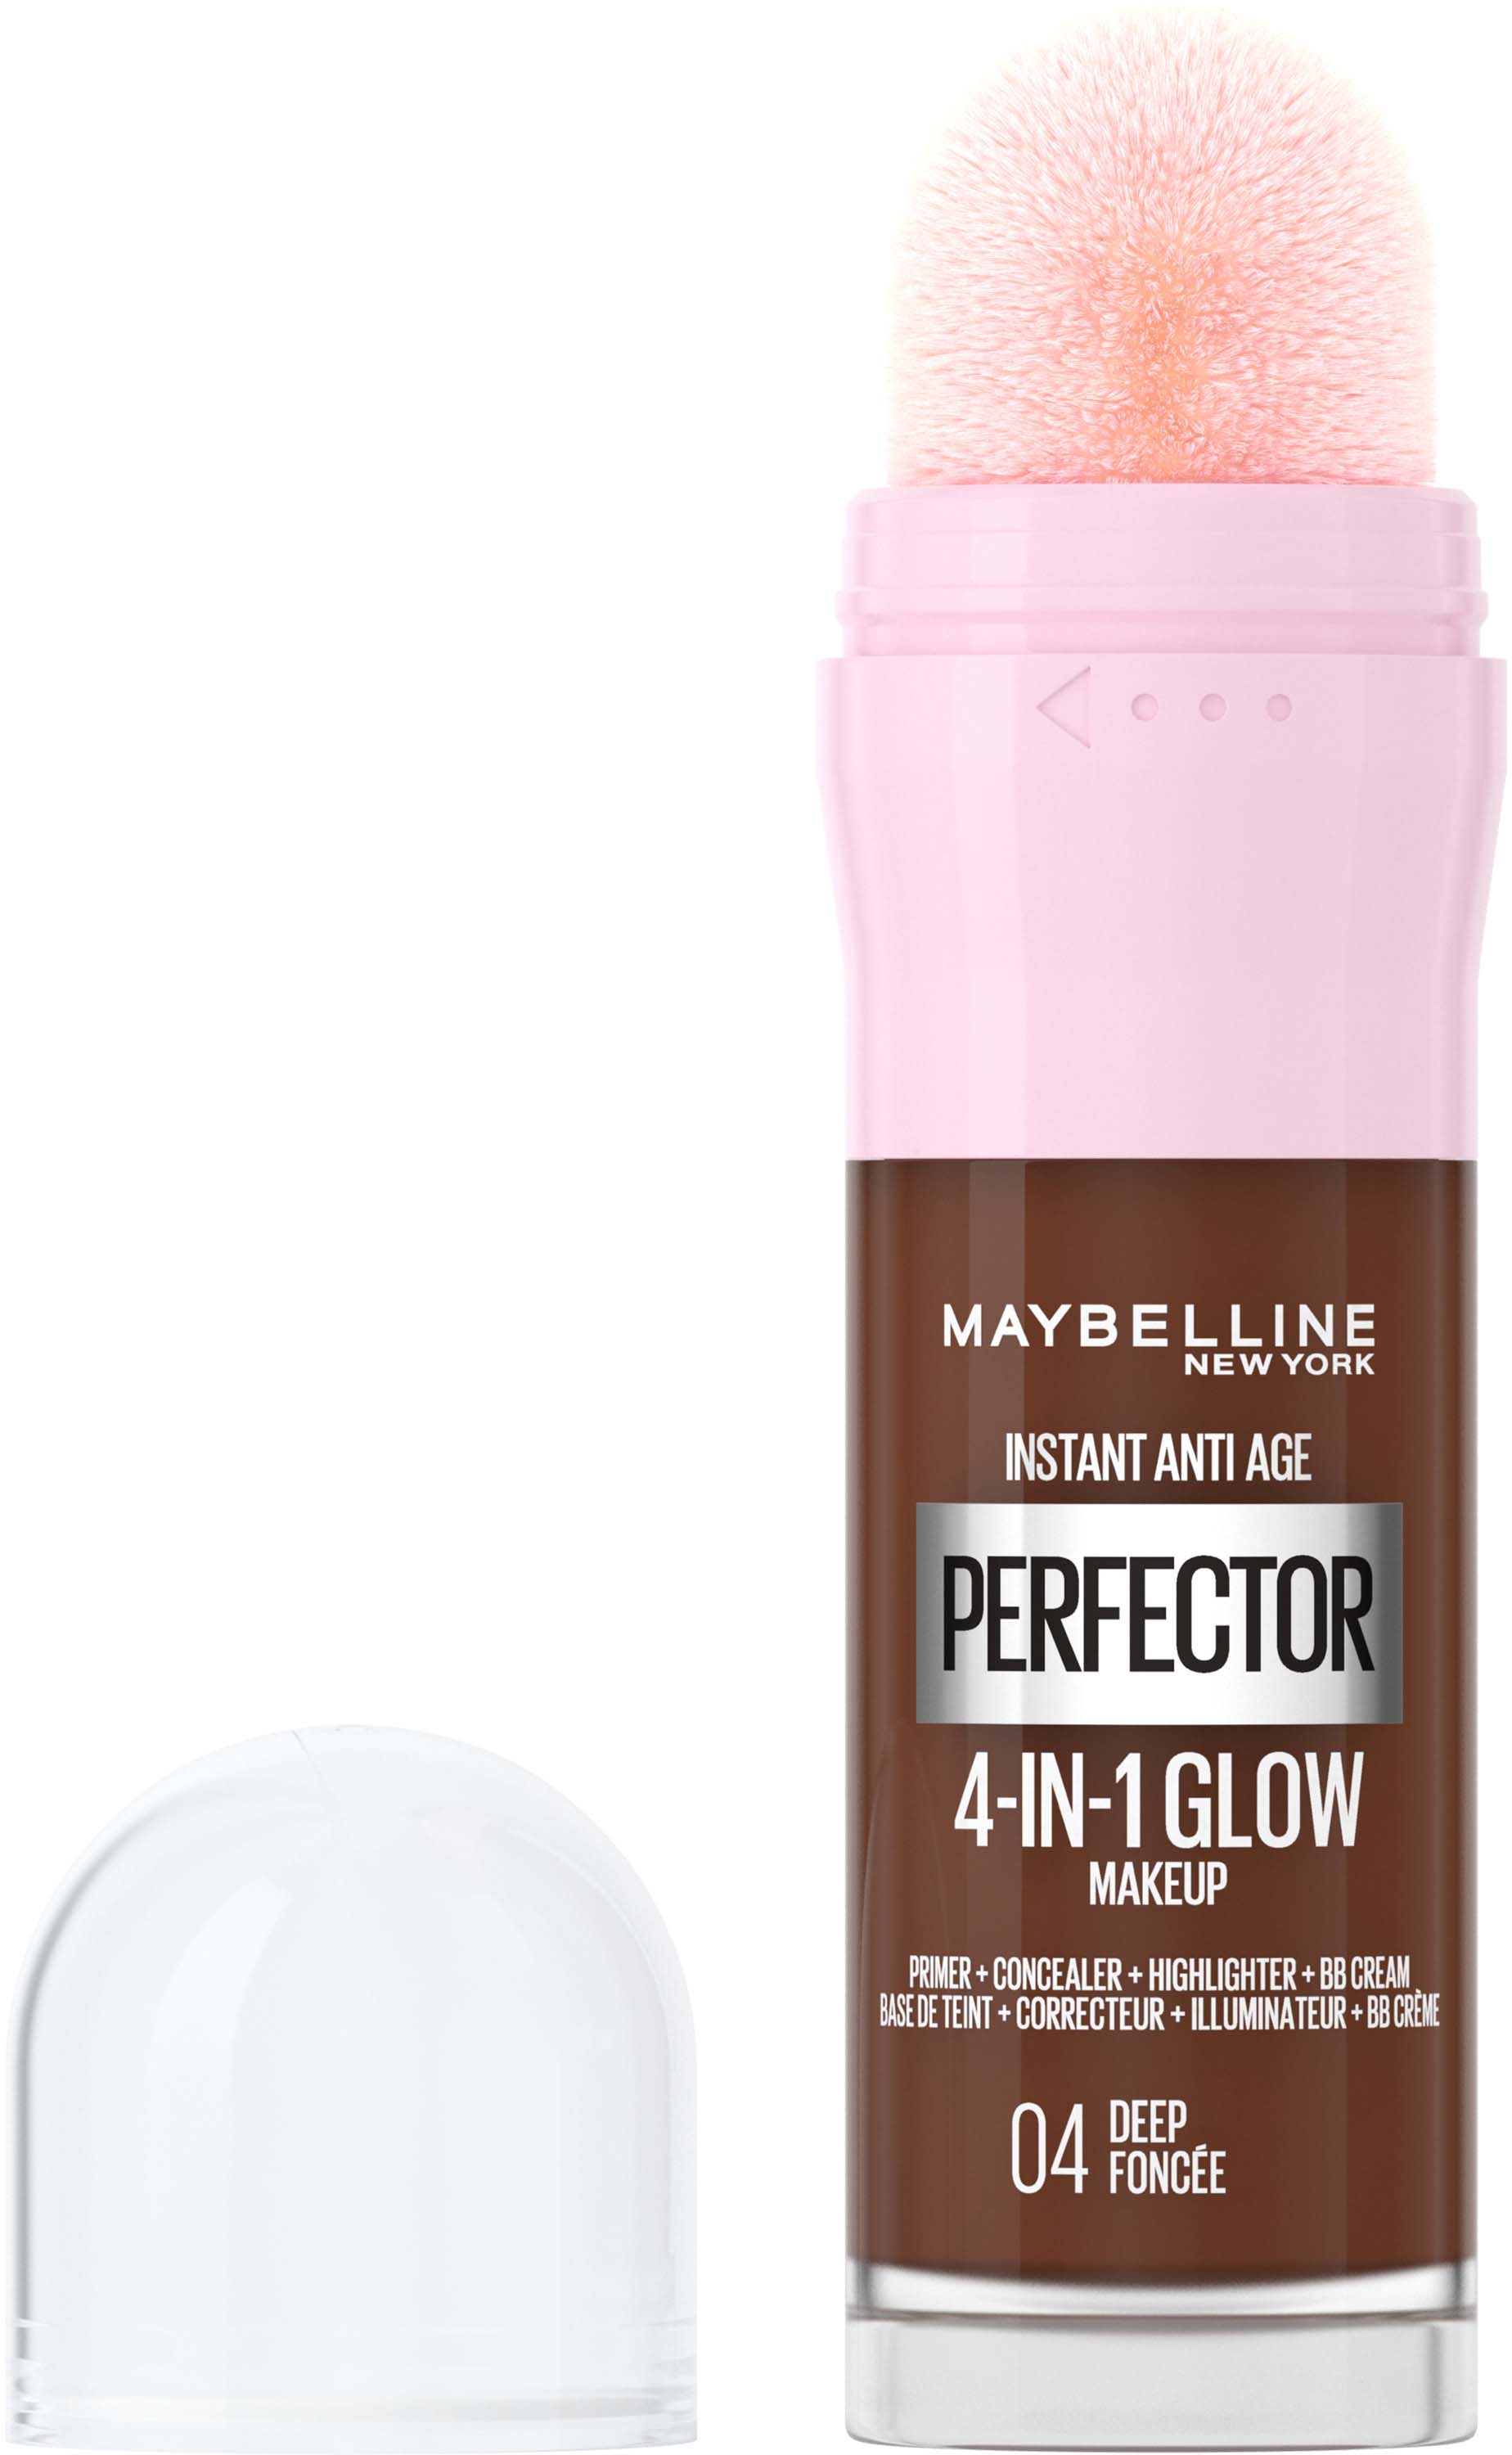 Medium Glow New Makeup Deep 4-in-1 03 Maybelline Anti-Age Perfector Instant York